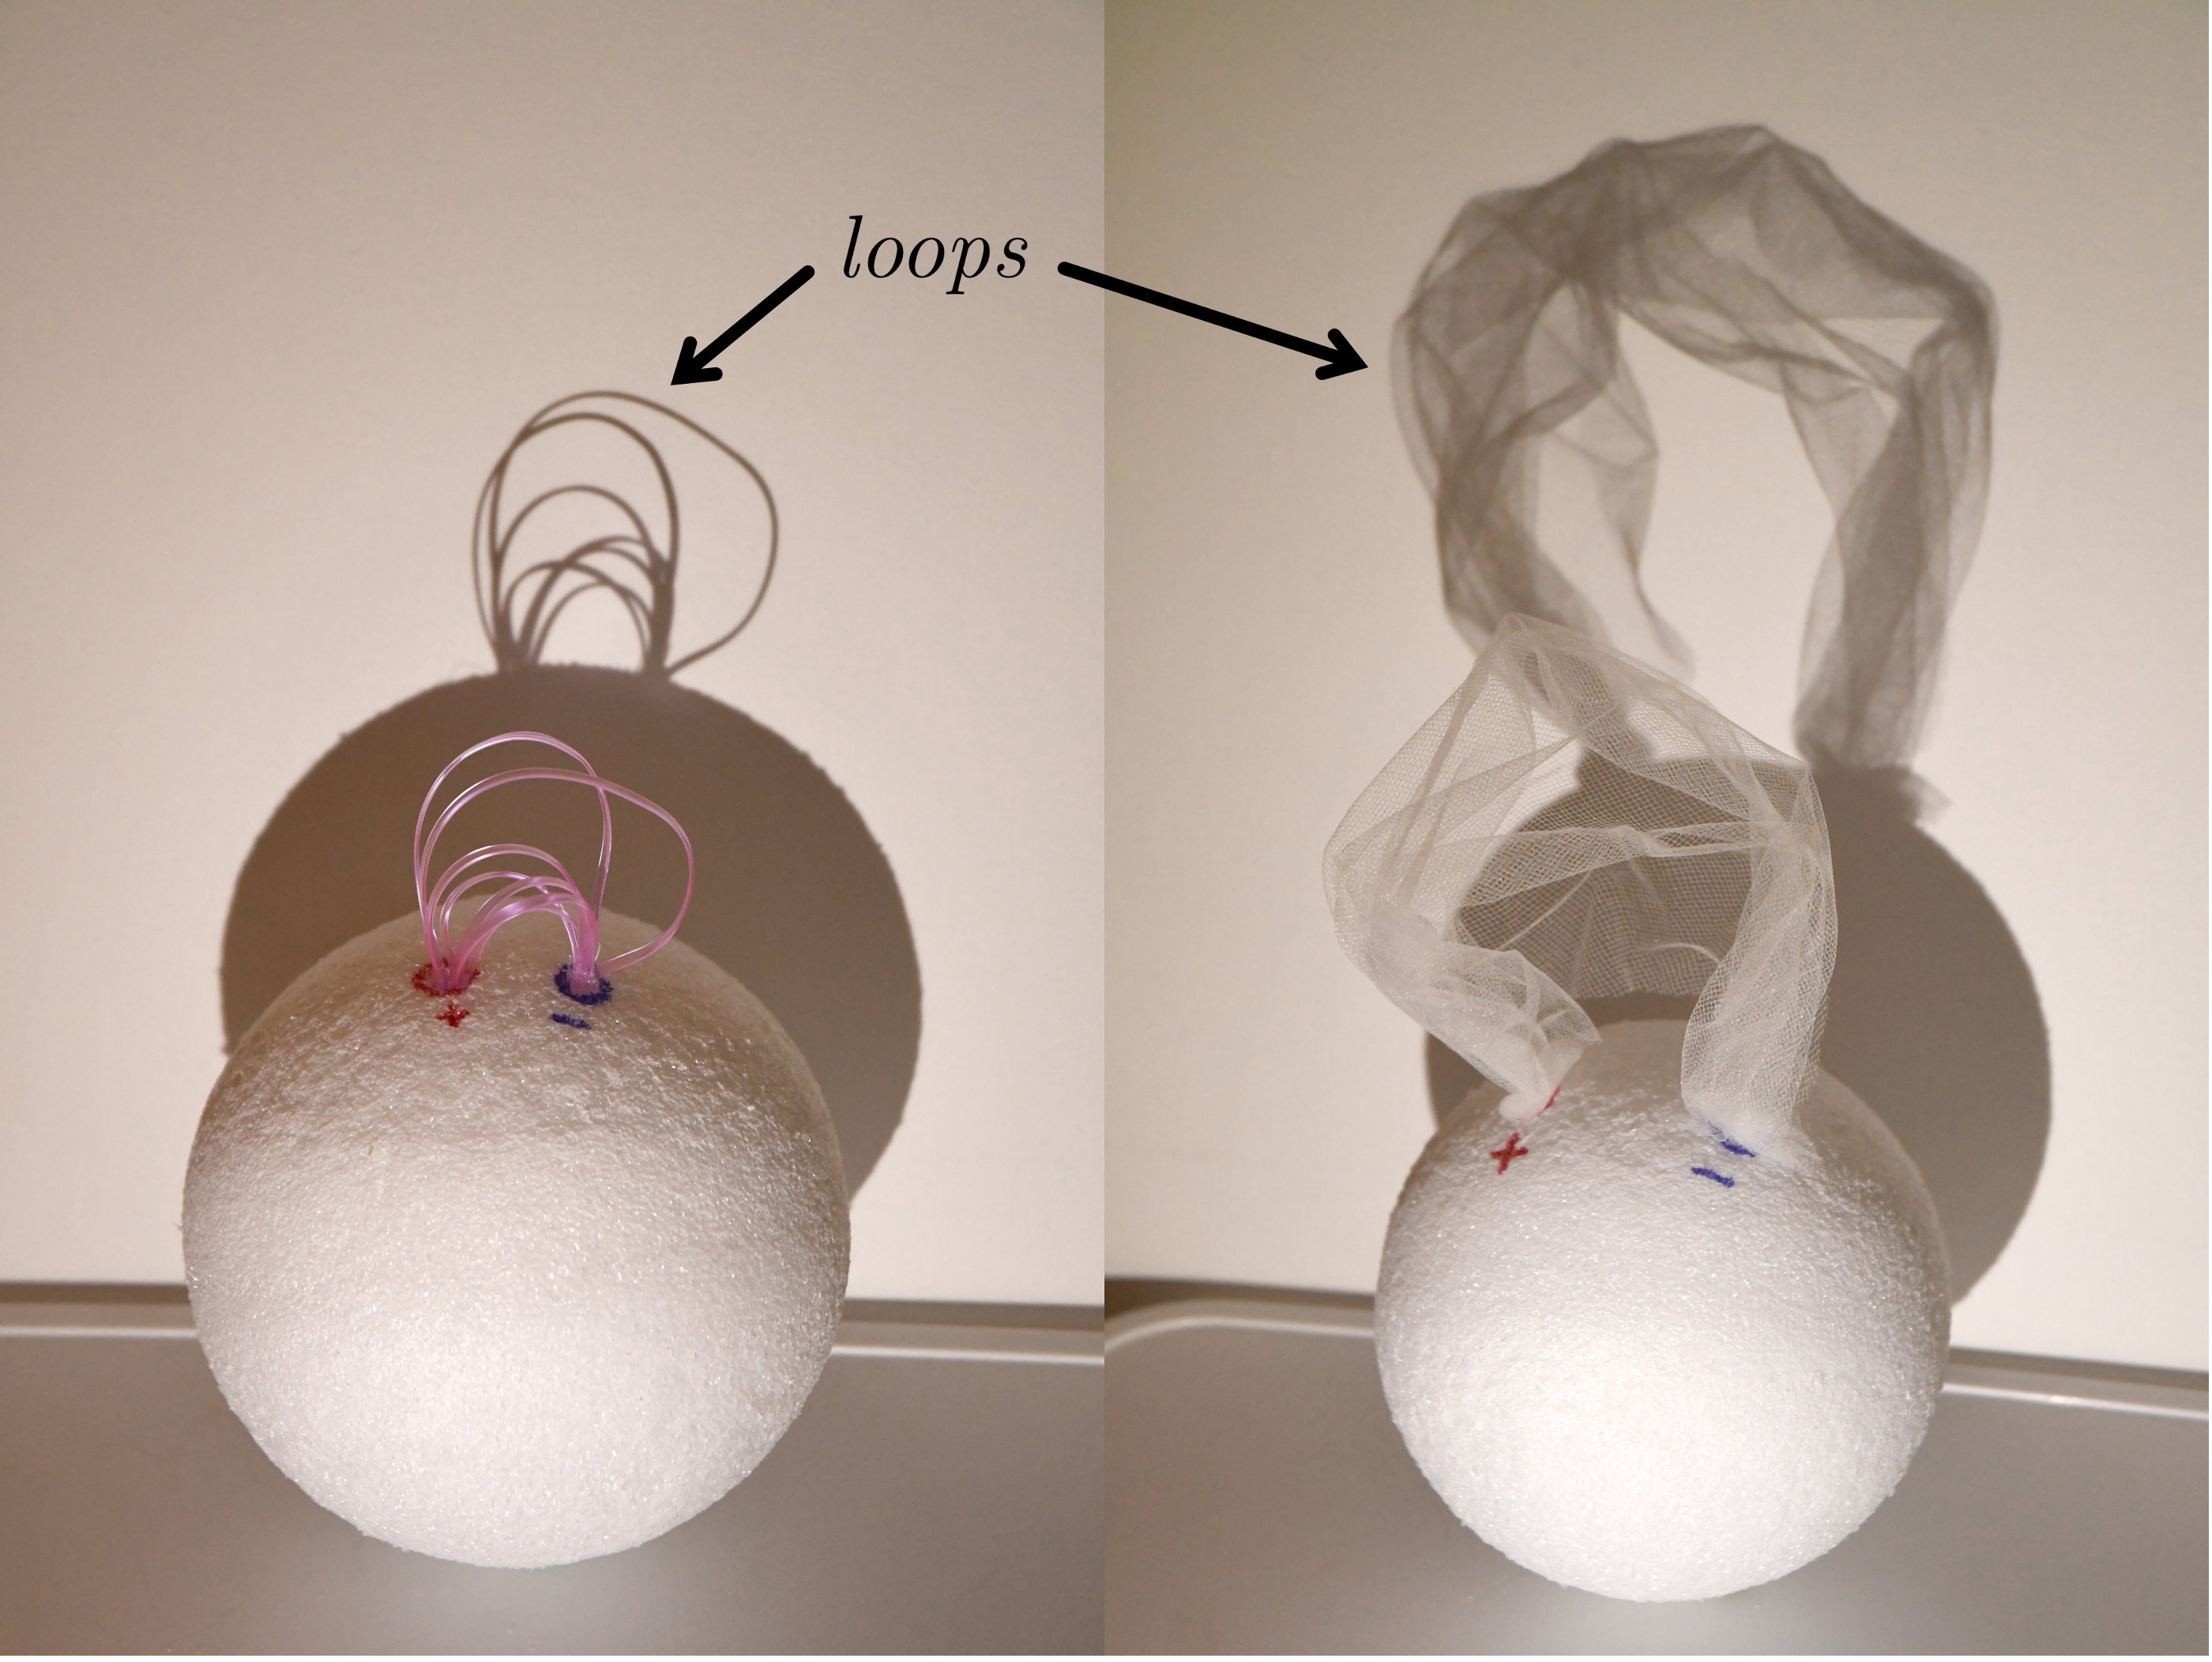 This simplified model compares the “garden hose” model of coronal loops (left) to the coronal veil model (right).